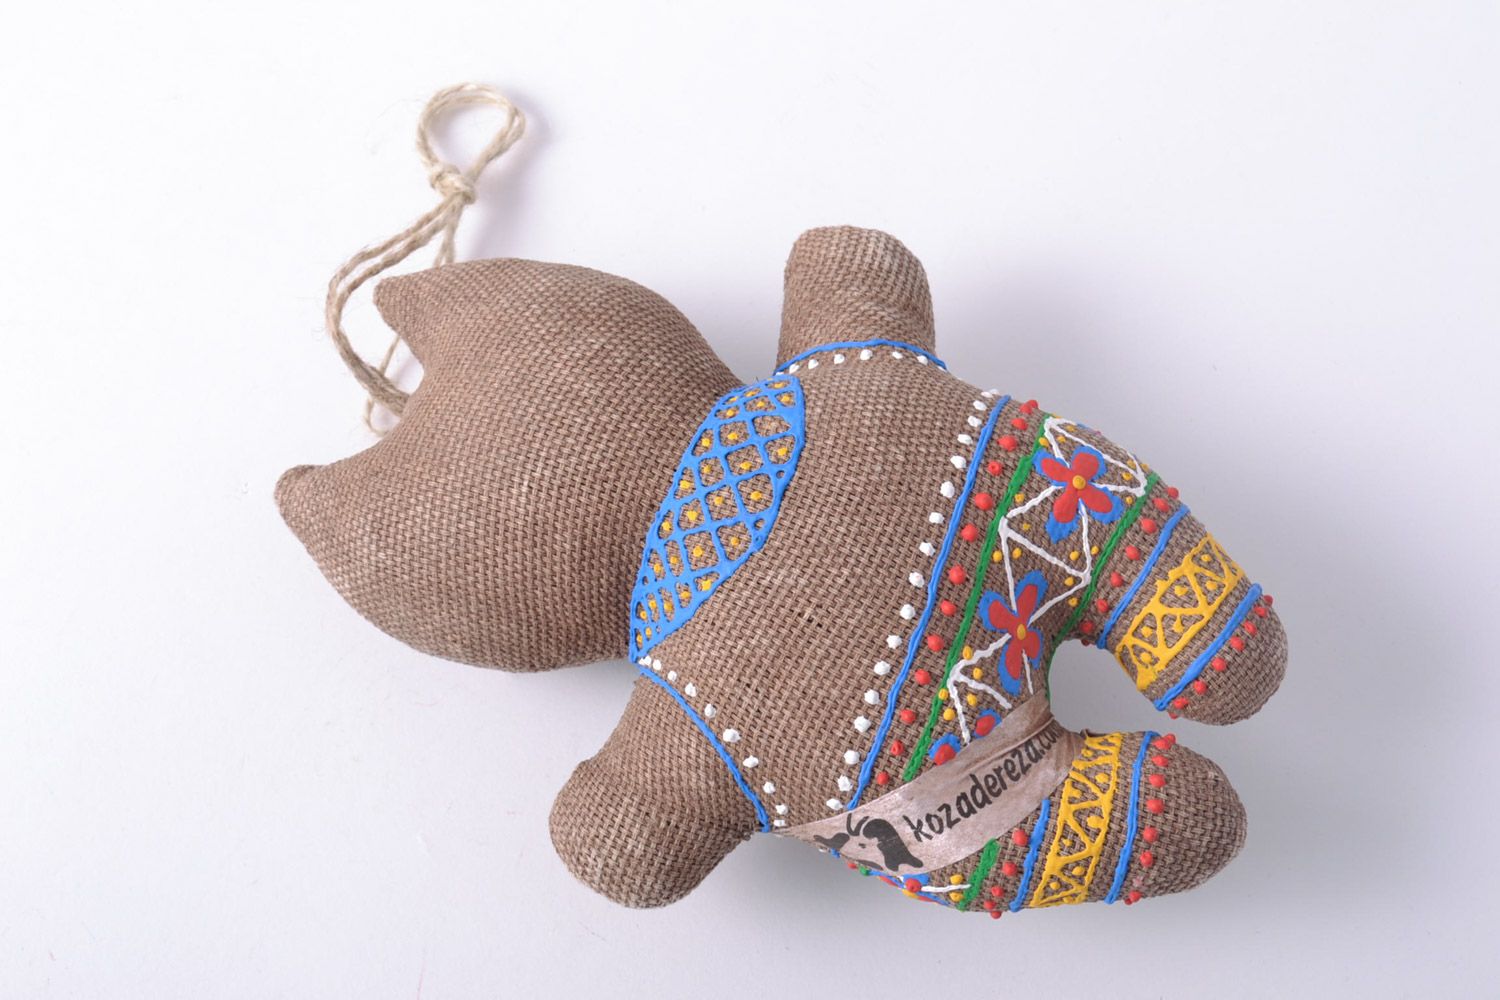 Homemade fabric interior pendant toy Cat with coffee processing photo 2